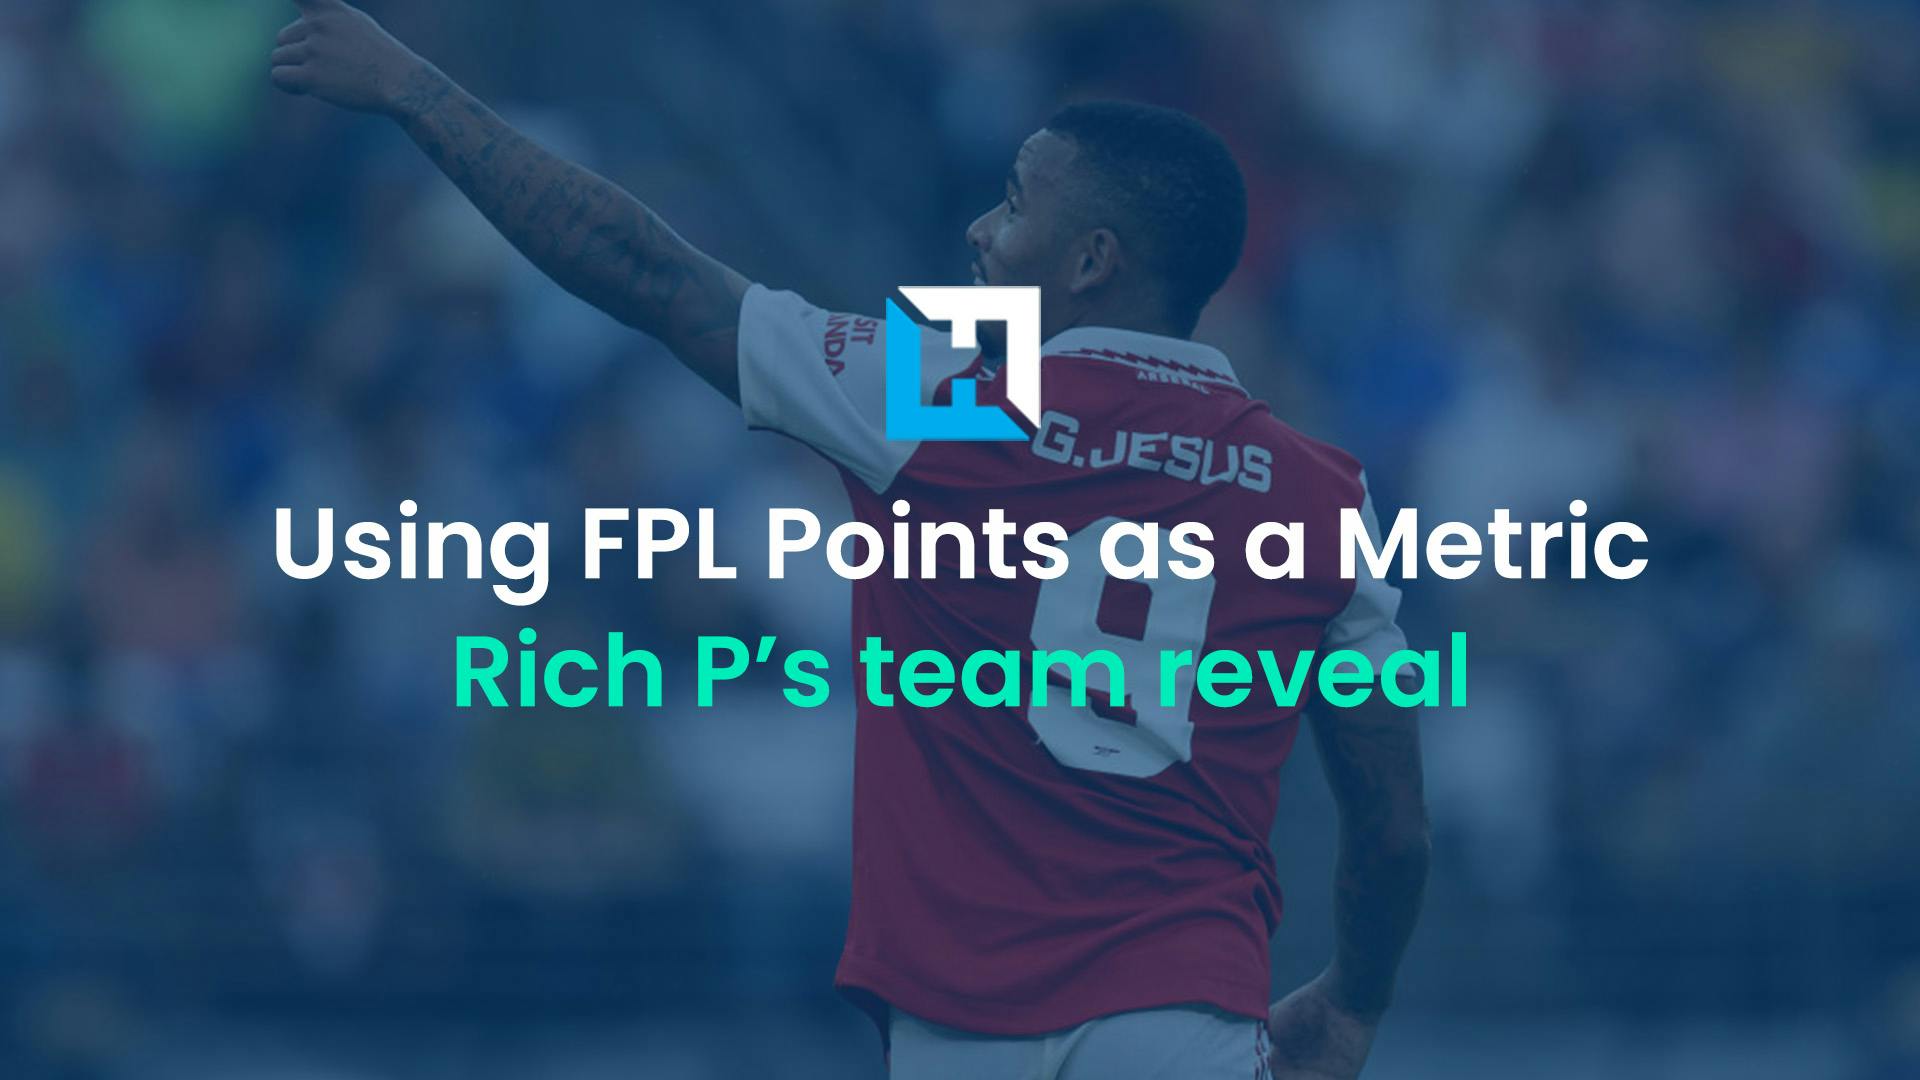 Using FPL Points as a Metric: Gameweek 2 team reveal 2022/23